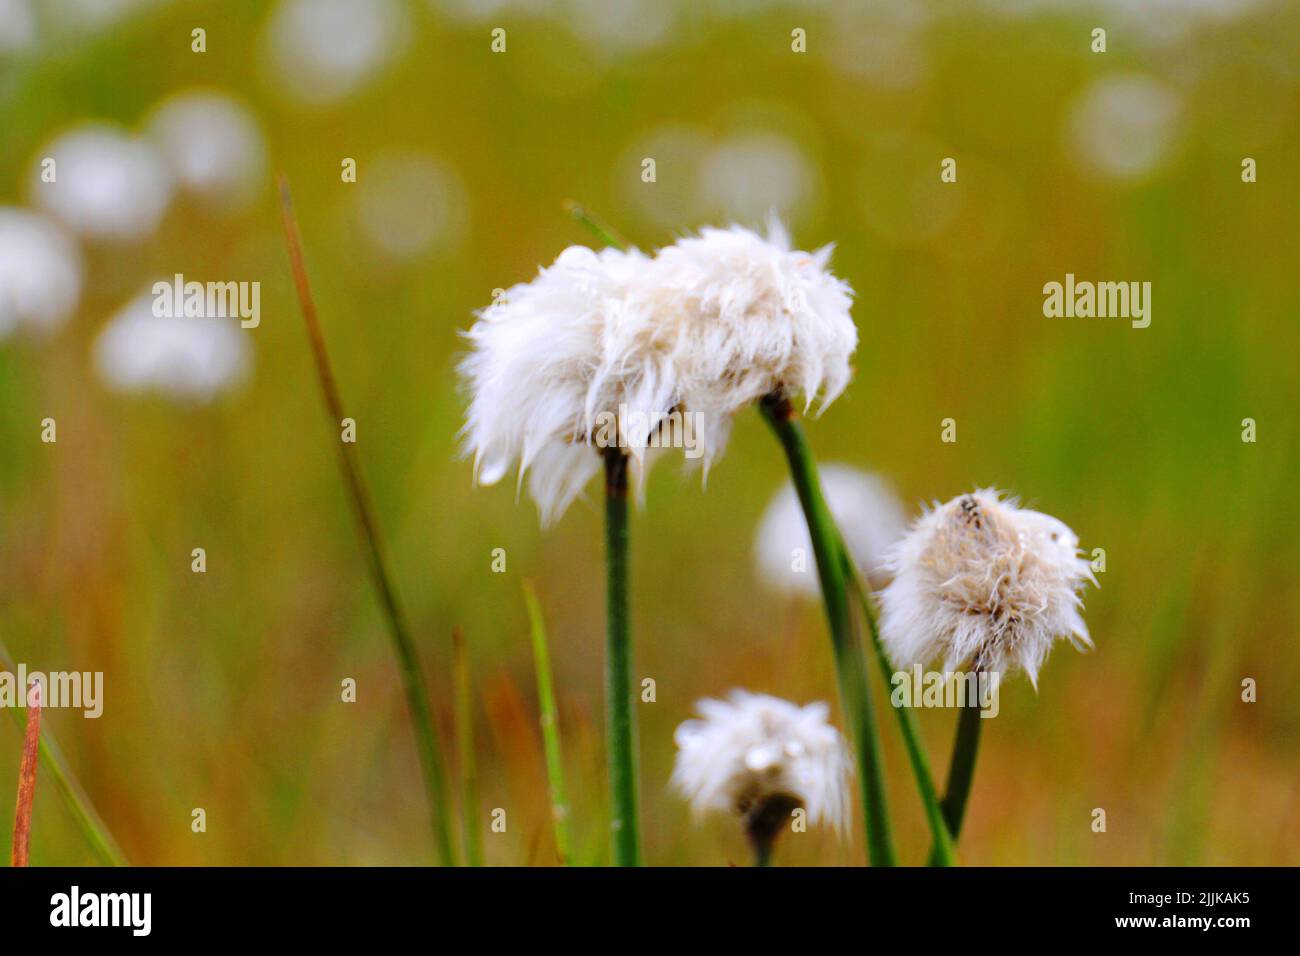 A selective focus shot of Eriophorum vaginatum blossom flowers with blurred field i the background Stock Photo